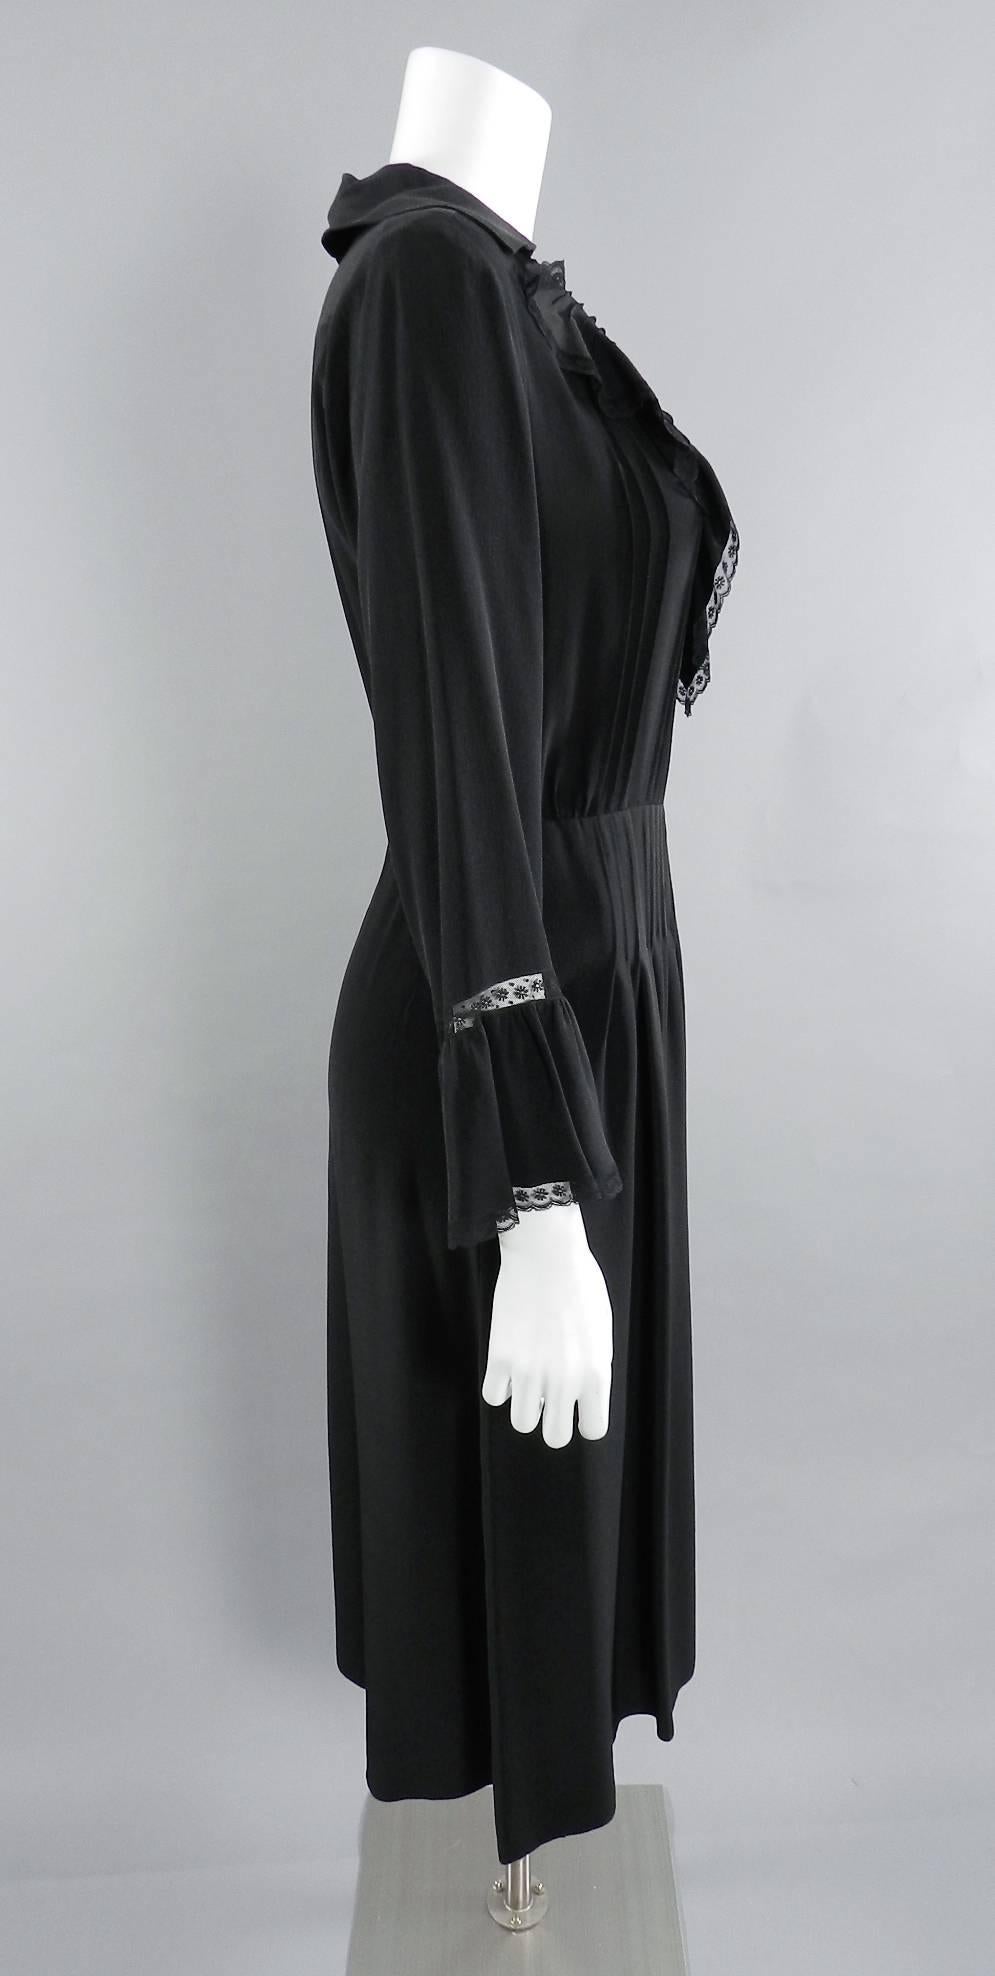 Vintage 1970's Chloe by Karl Lagerfeld Black Silk Ruffle Dress.  Centre back zipper, hidden side hip pockets, ruffle sleeves and neckline. Excellent vintage condition. About a USA 8. Garment bust measures 36